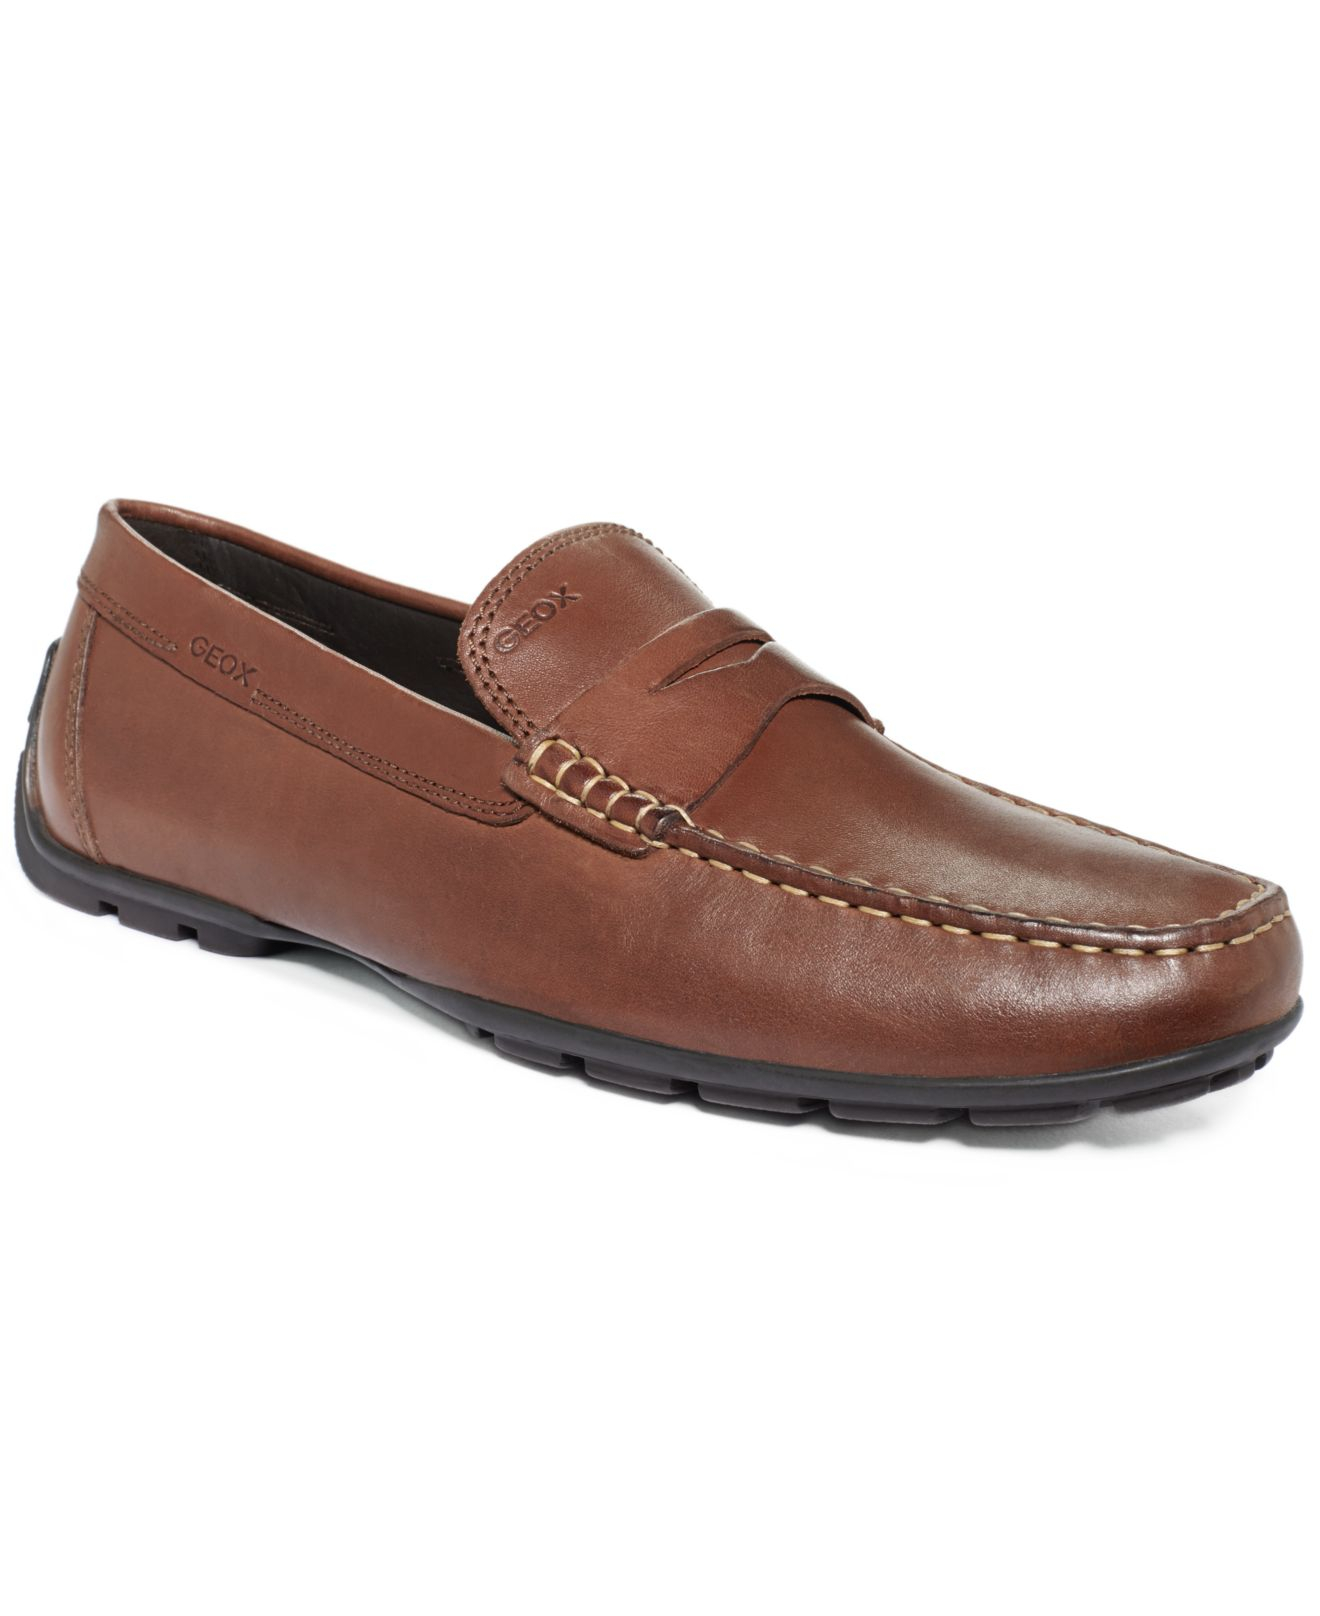 Geox Monet Penny Loafers in Coffee (Brown) for Men - Lyst